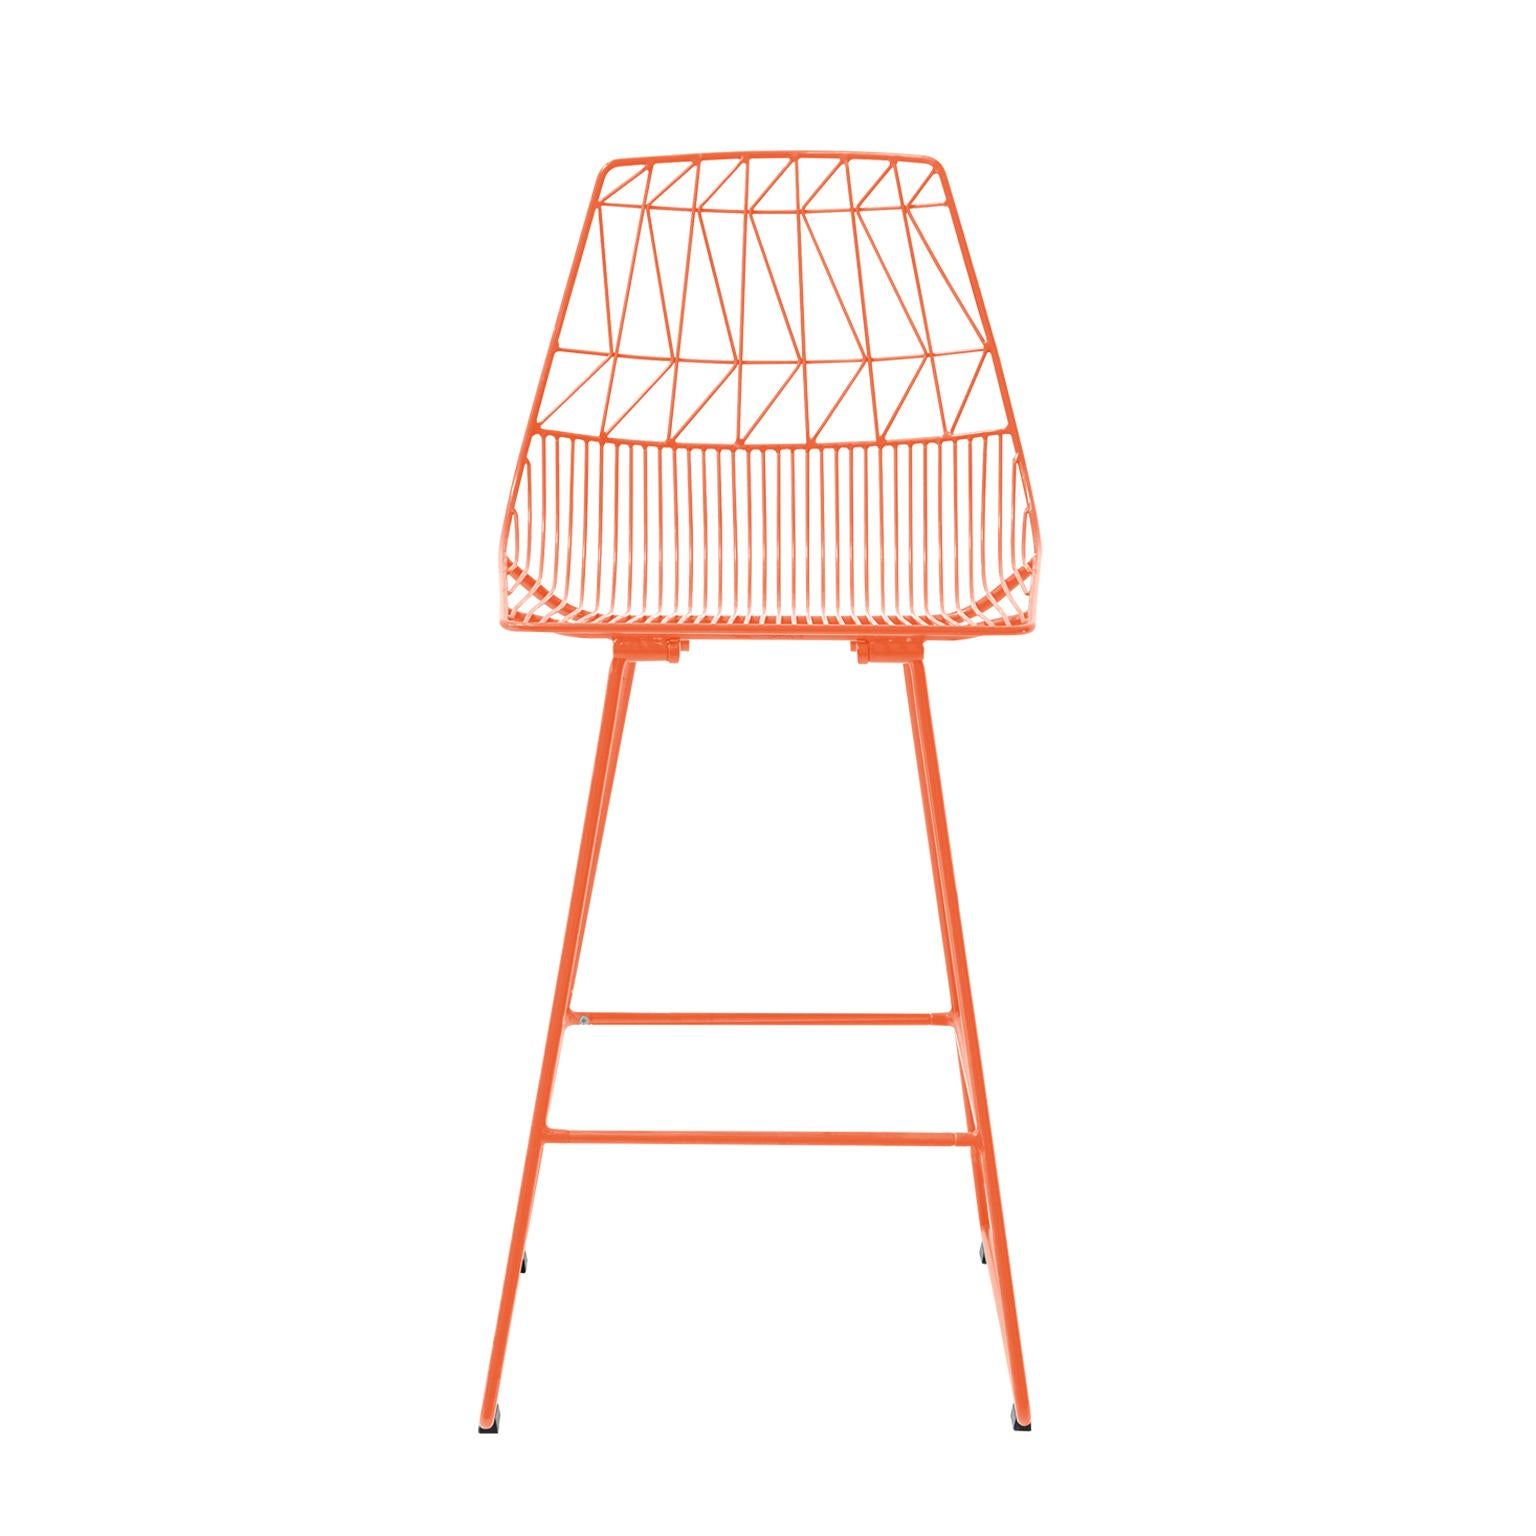 Bend Goods wire furniture
The Lucy counter stool can be found in commercial projects around the world, from Los Angeles to Paris. With the contemporary wire design of Bend Goods' signature Lucy Chair and a variety of durable and customizable